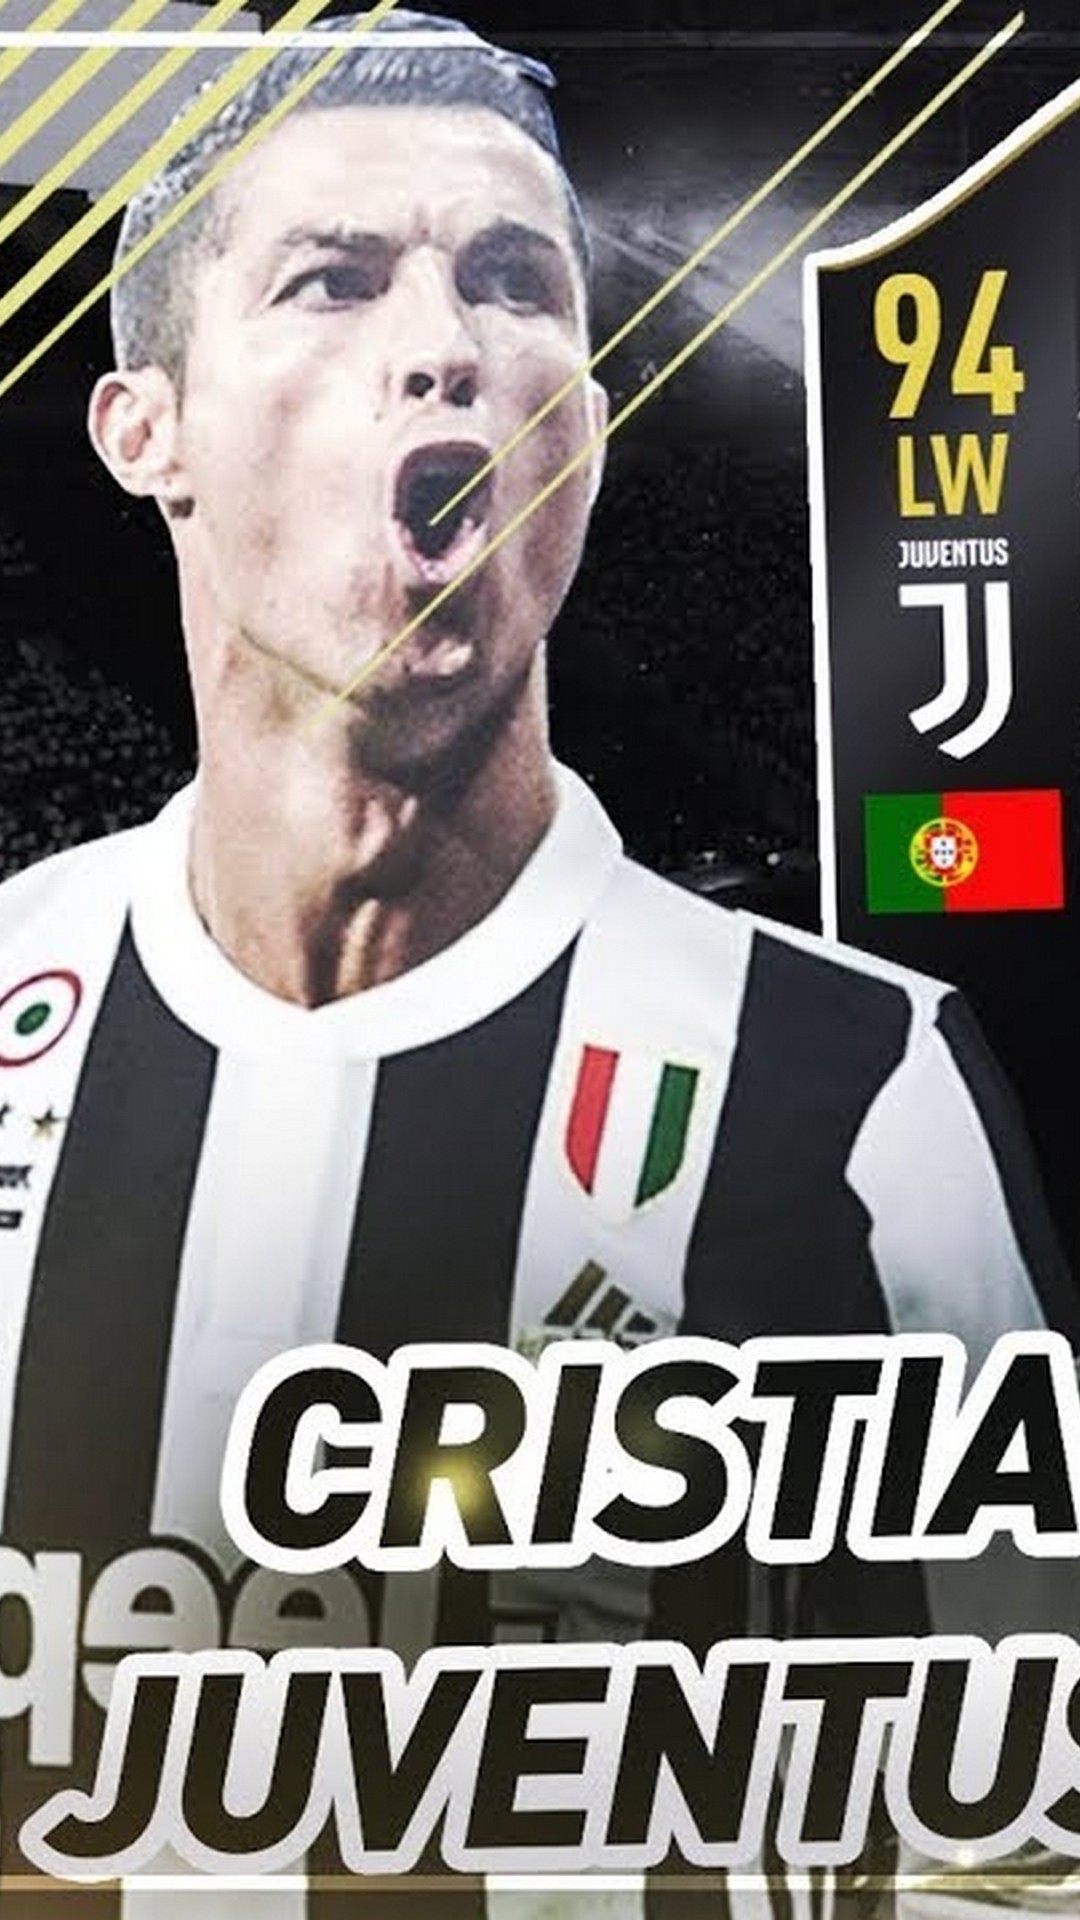 Cristiano Ronaldo Juventus Wallpaper For Android with image resolution 1080x1920 pixel. You can make this wallpaper for your Android backgrounds, Tablet, Smartphones Screensavers and Mobile Phone Lock Screen